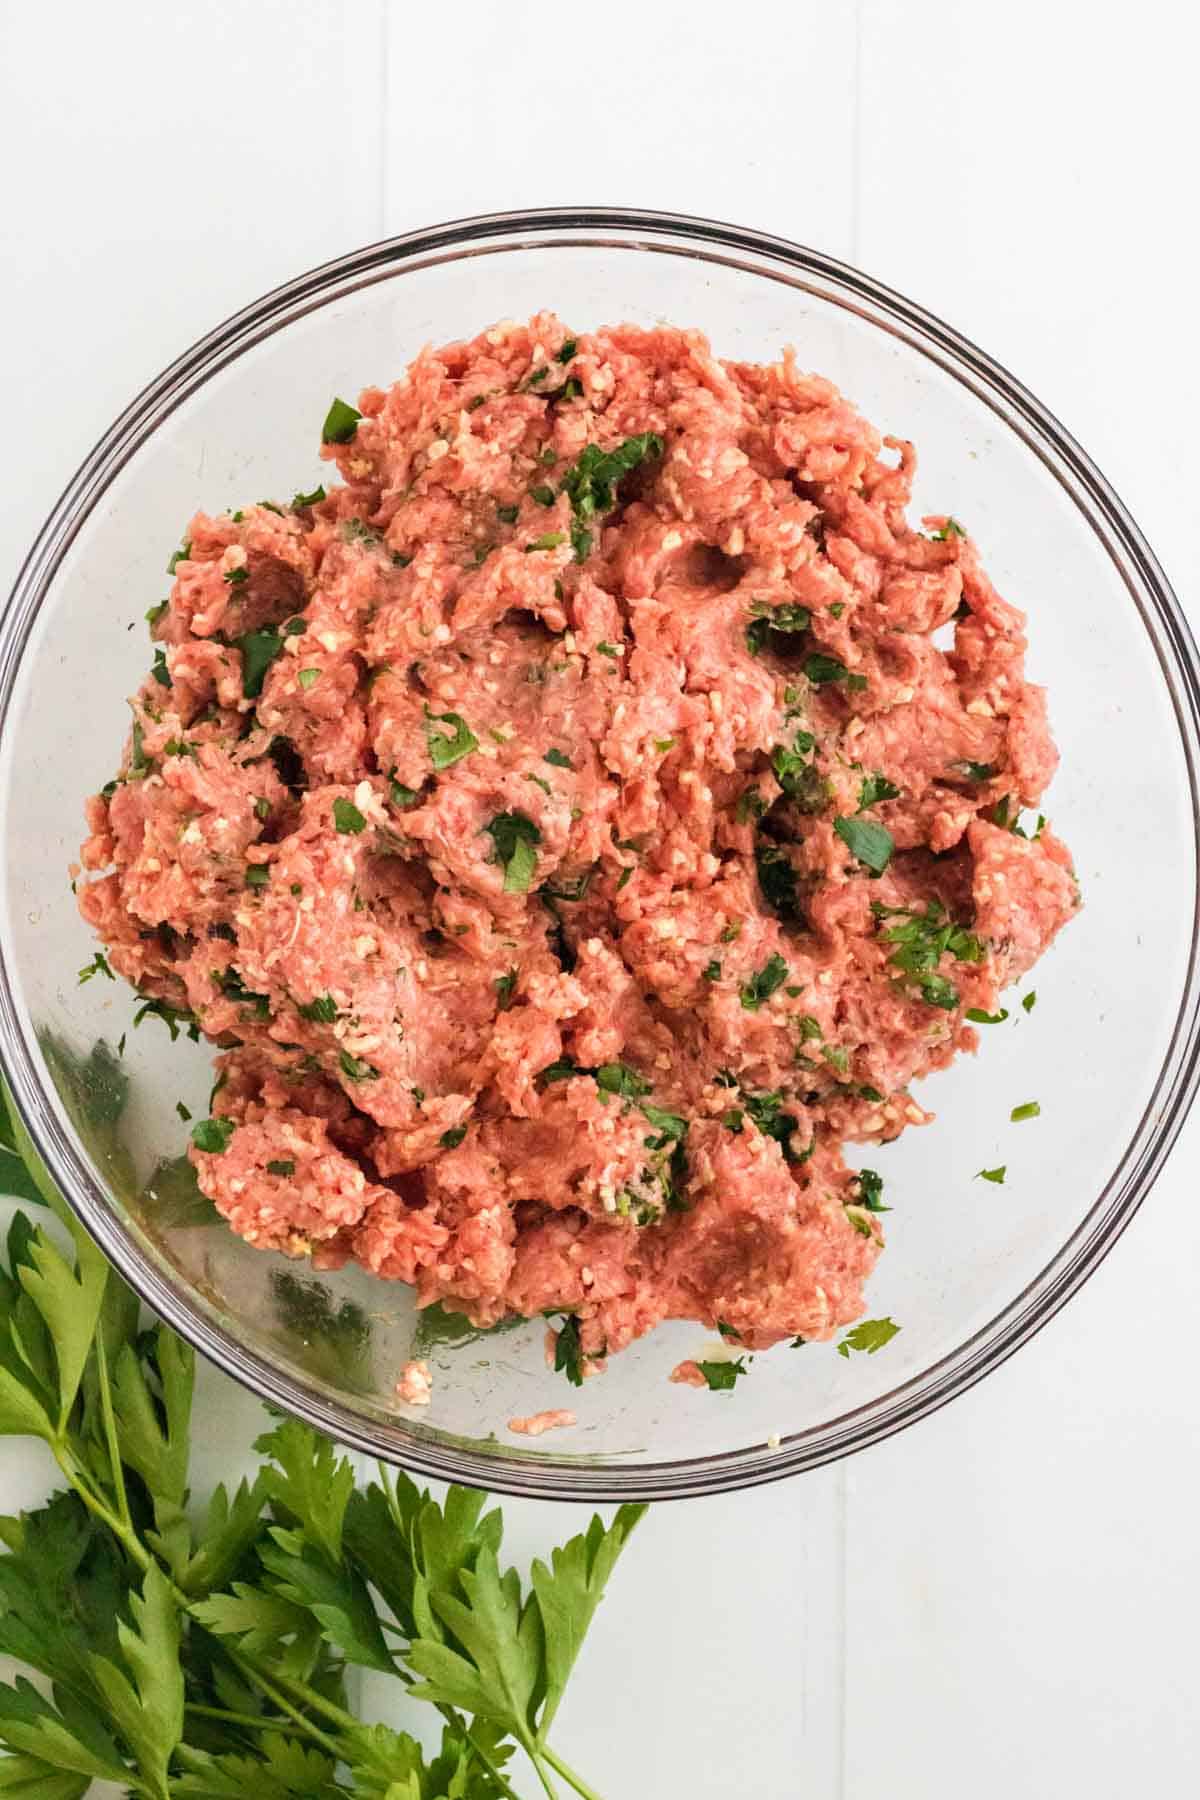 The meatloaf "dough" inside of a large glass mixing bowl